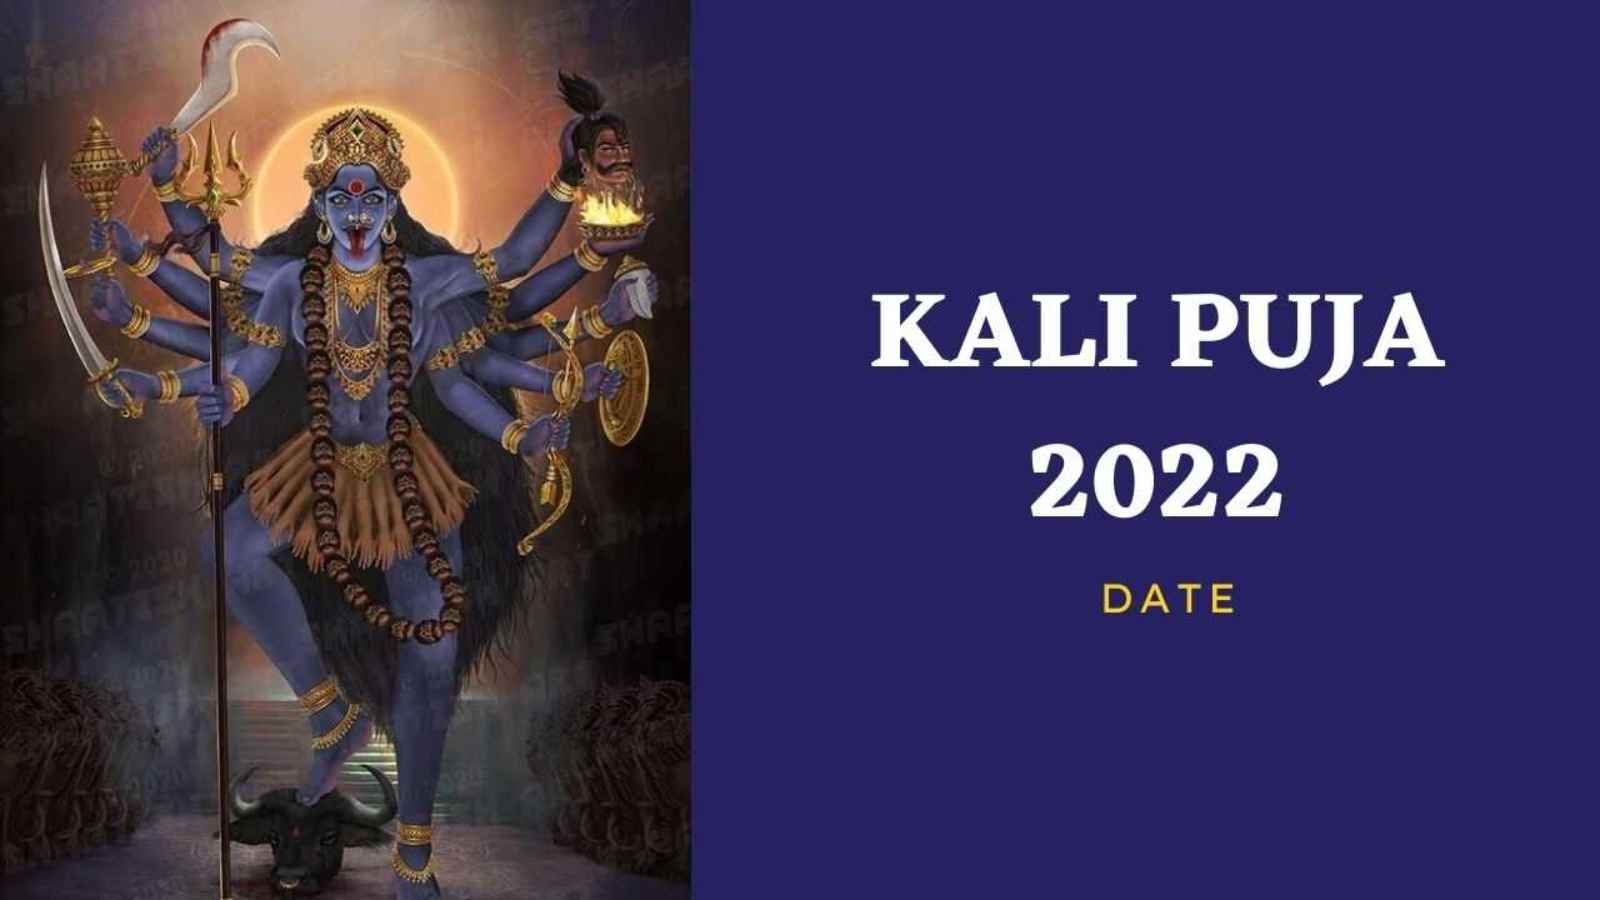 Happy Kali Puja Wishes, Messages, Quotes, Greetings and WhatsApp Status